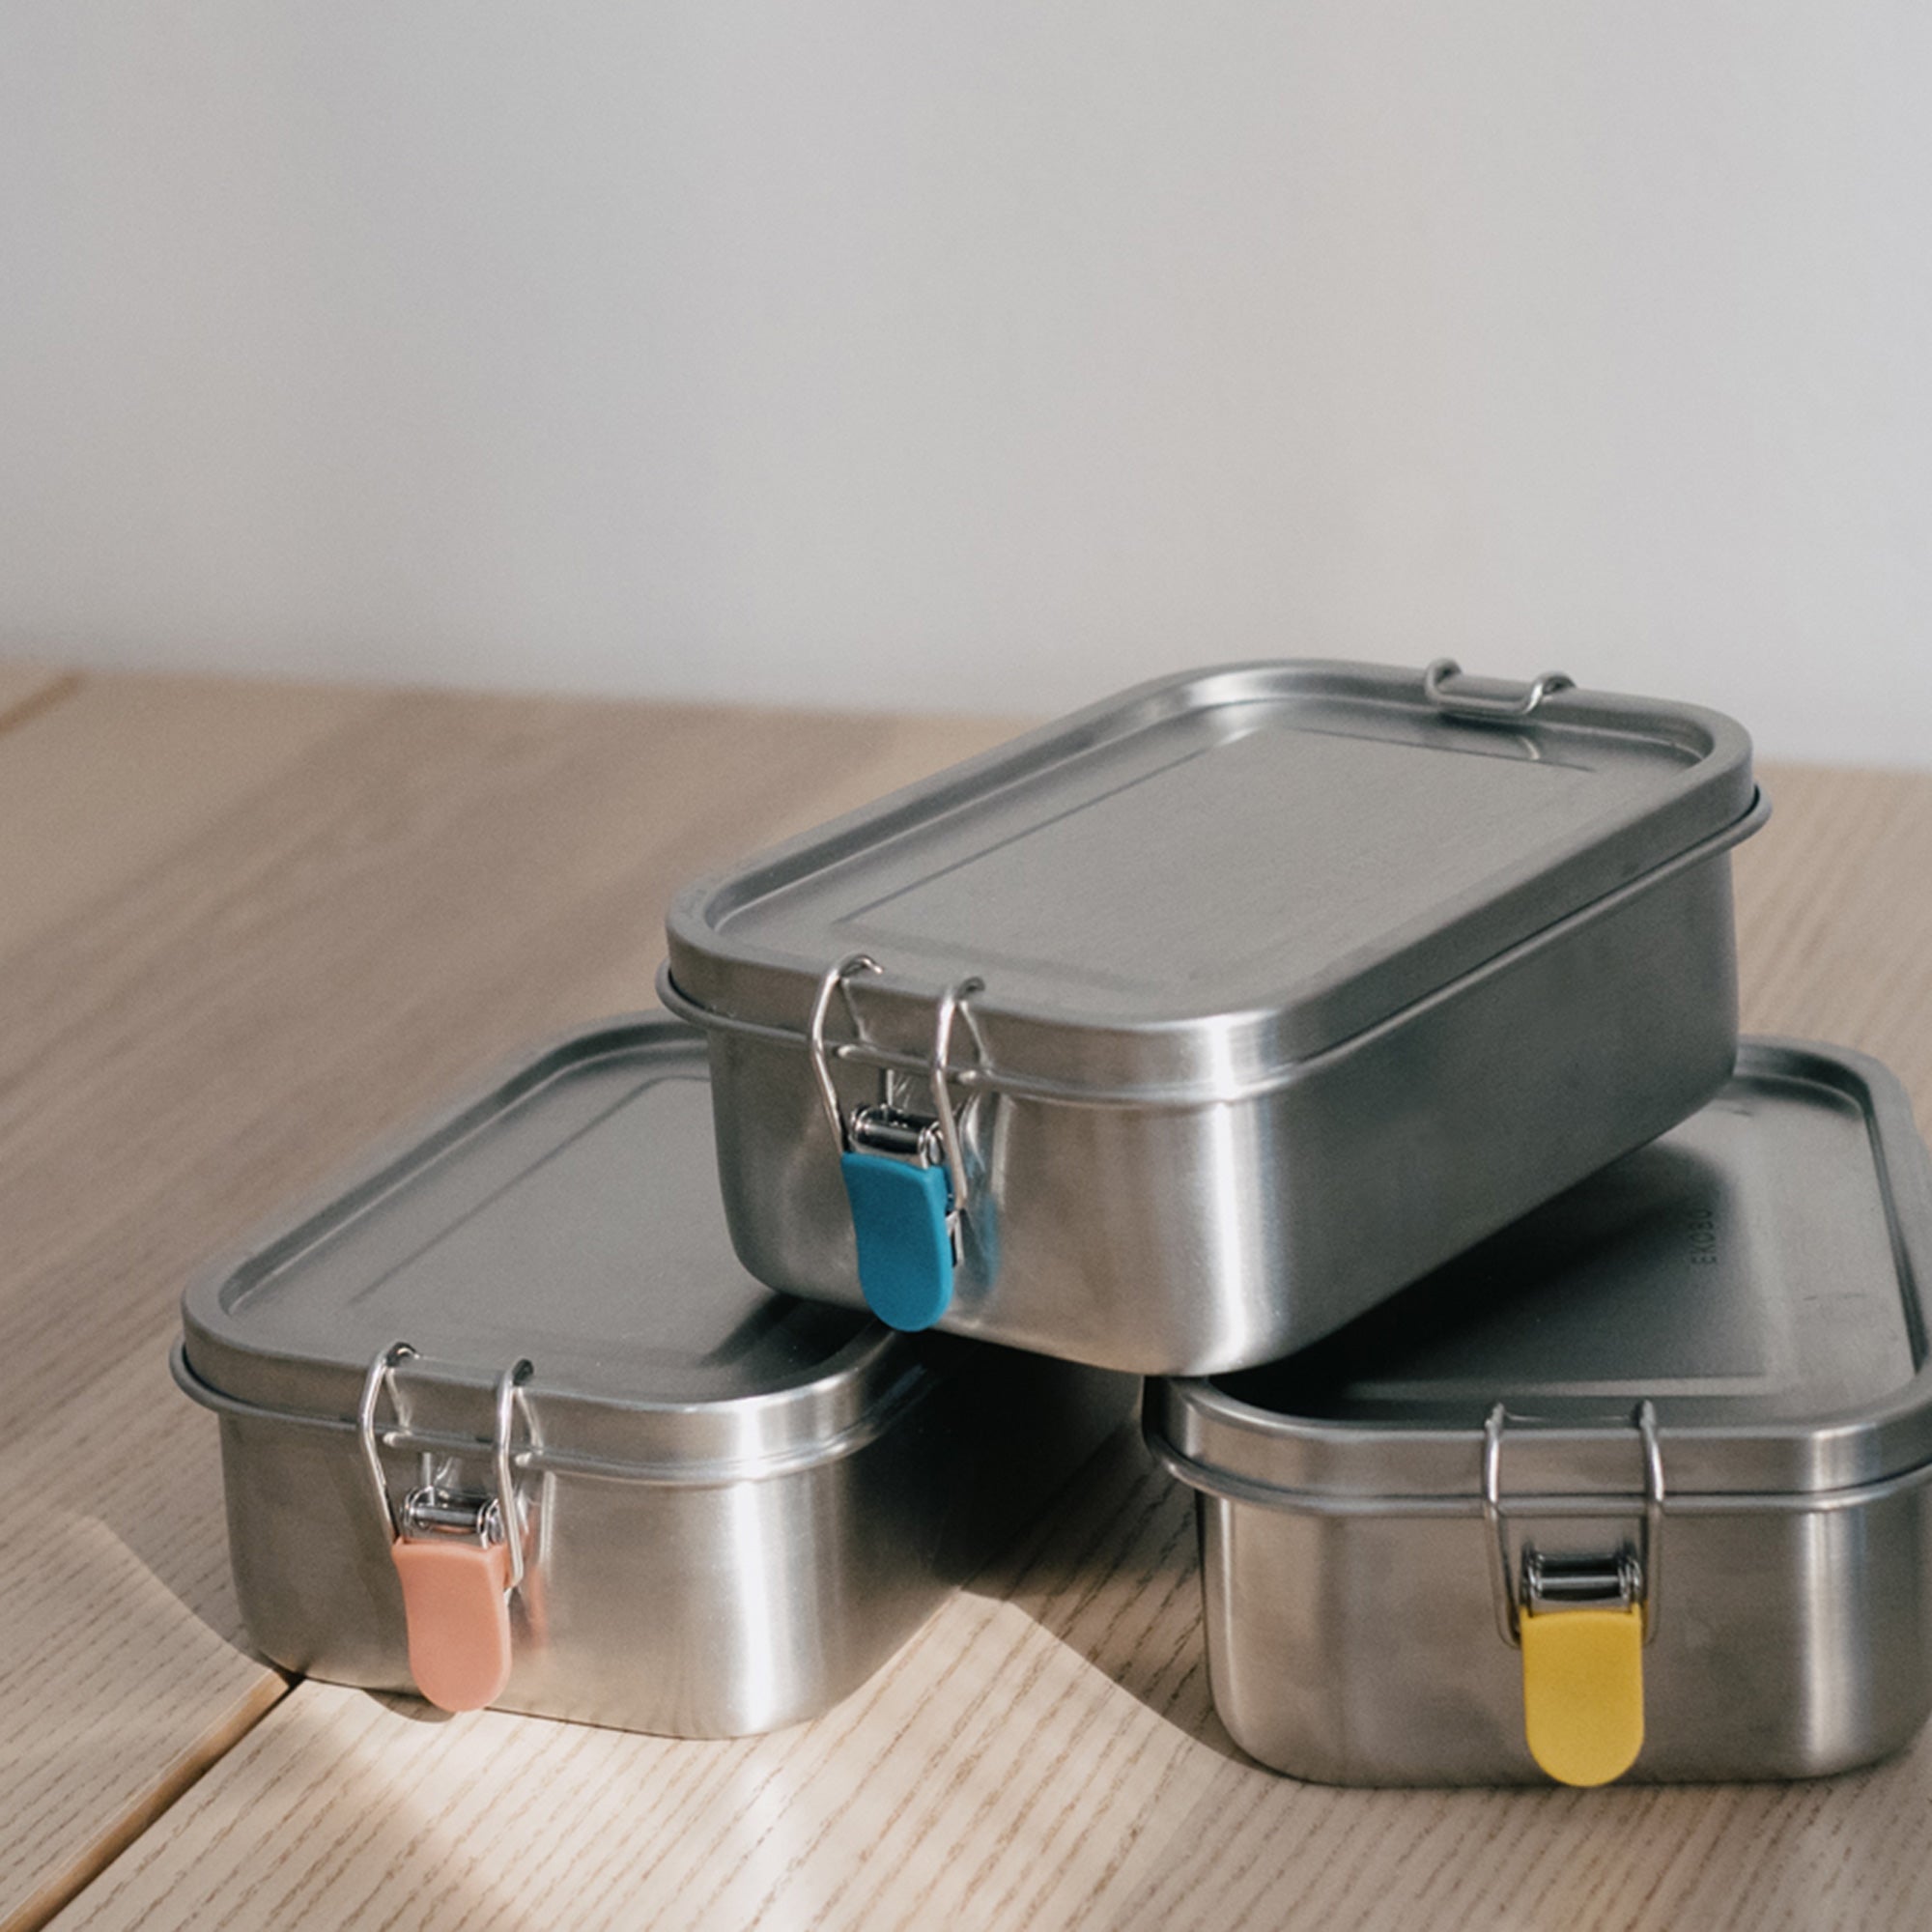 Stainless Steel Lunch Box with heat safe insert - Lemon